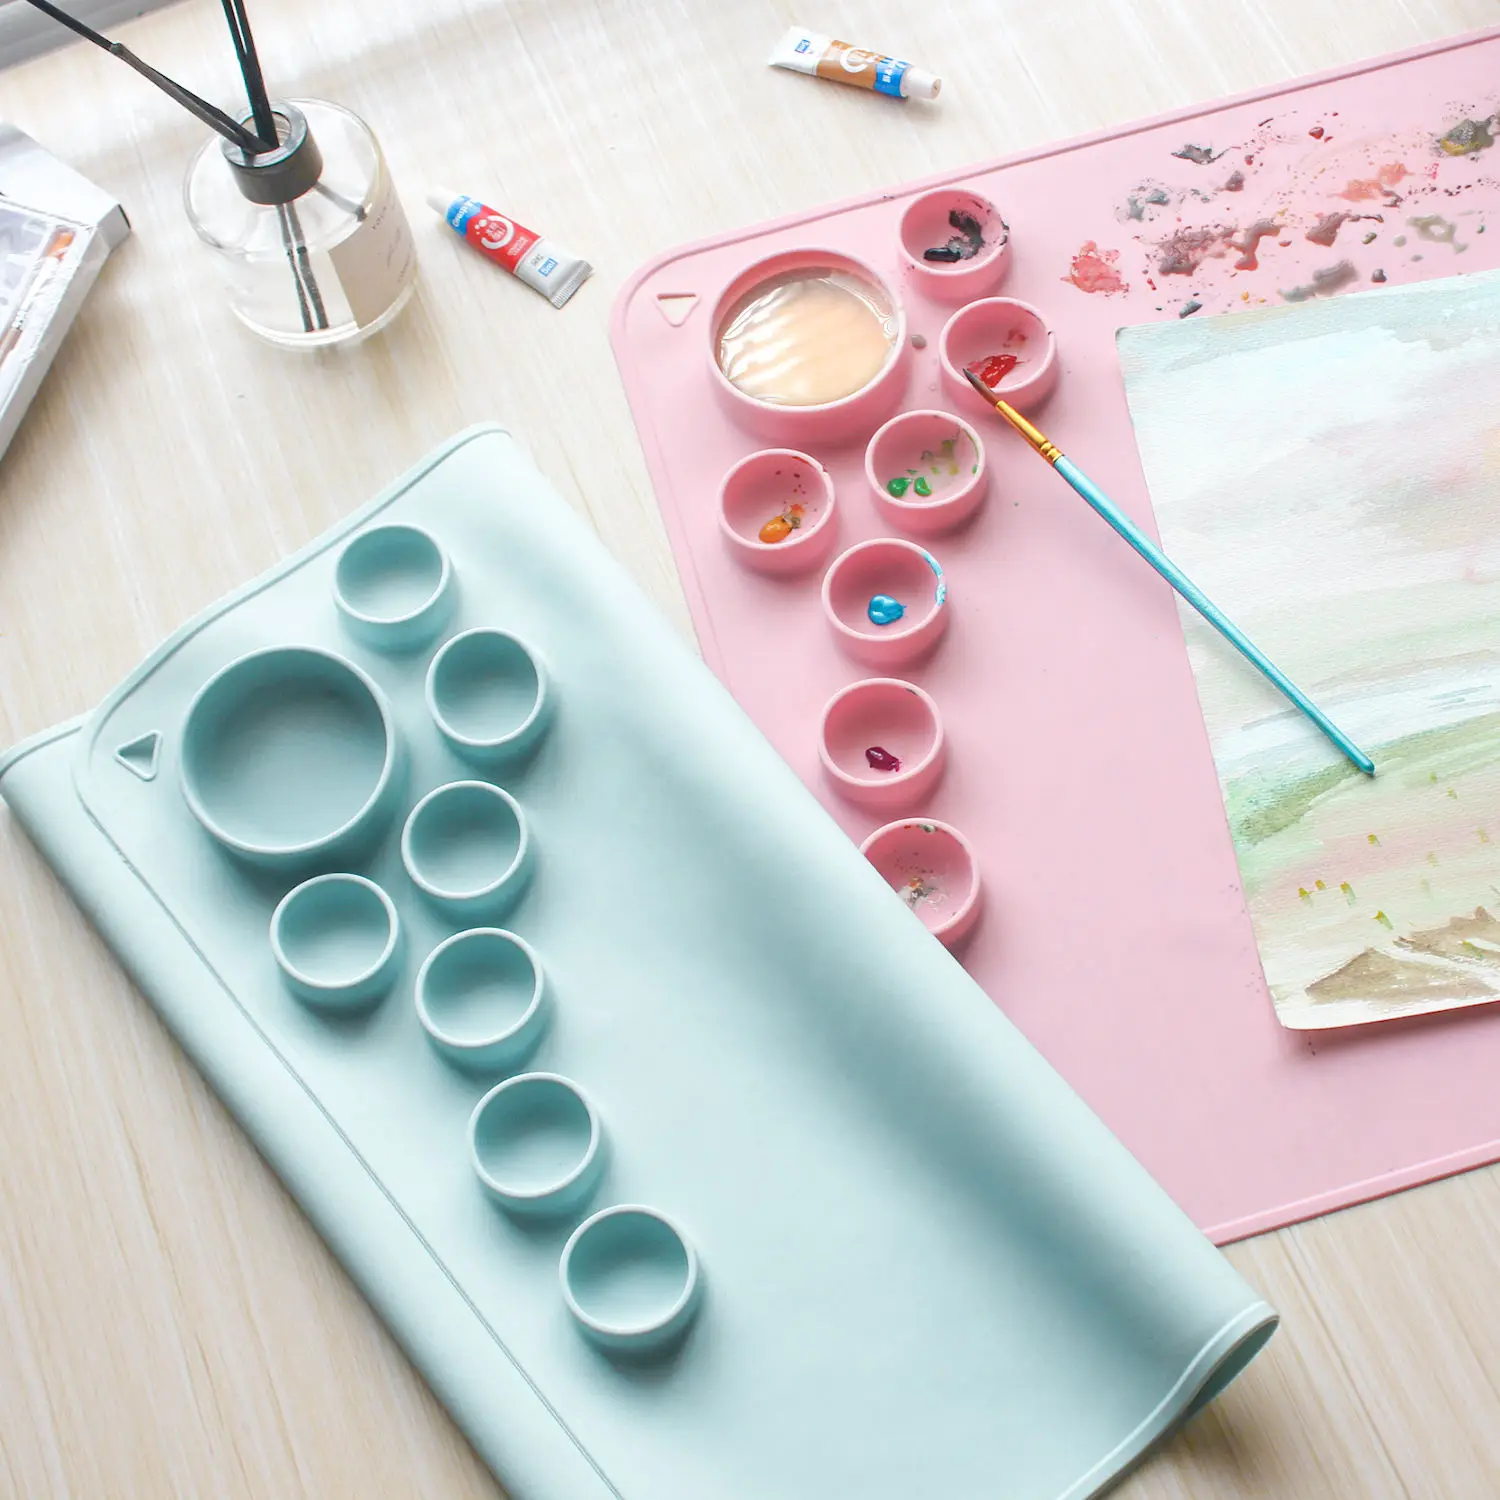 CHUJU Silicone Painting Pad Oil Painting Pad Art Palette Washable Easy Clean Silicone Drawing Craft Mat Reusable Children mat